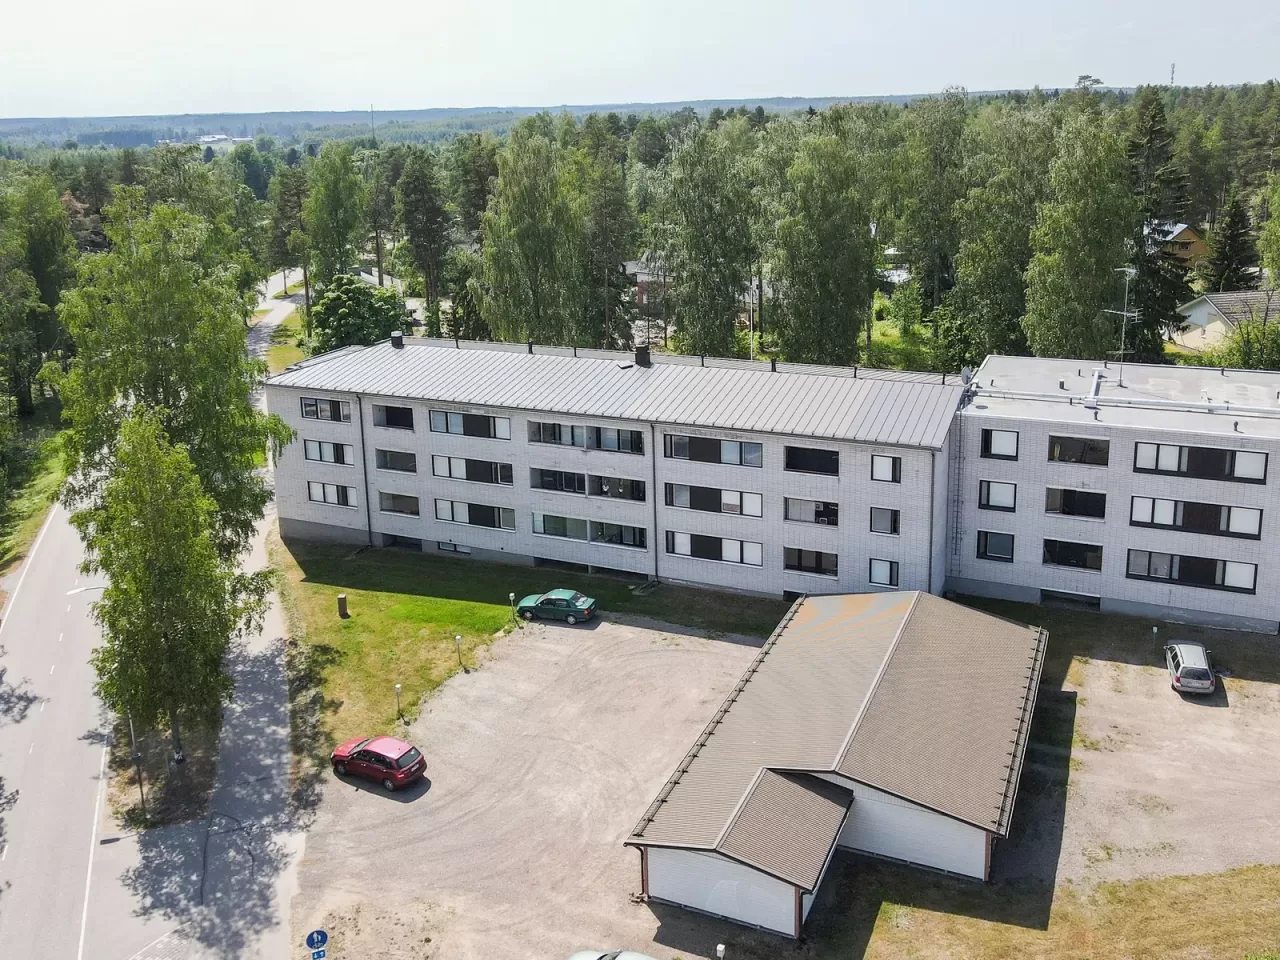 Flat in Taavetti, Finland, 33.5 sq.m - picture 1